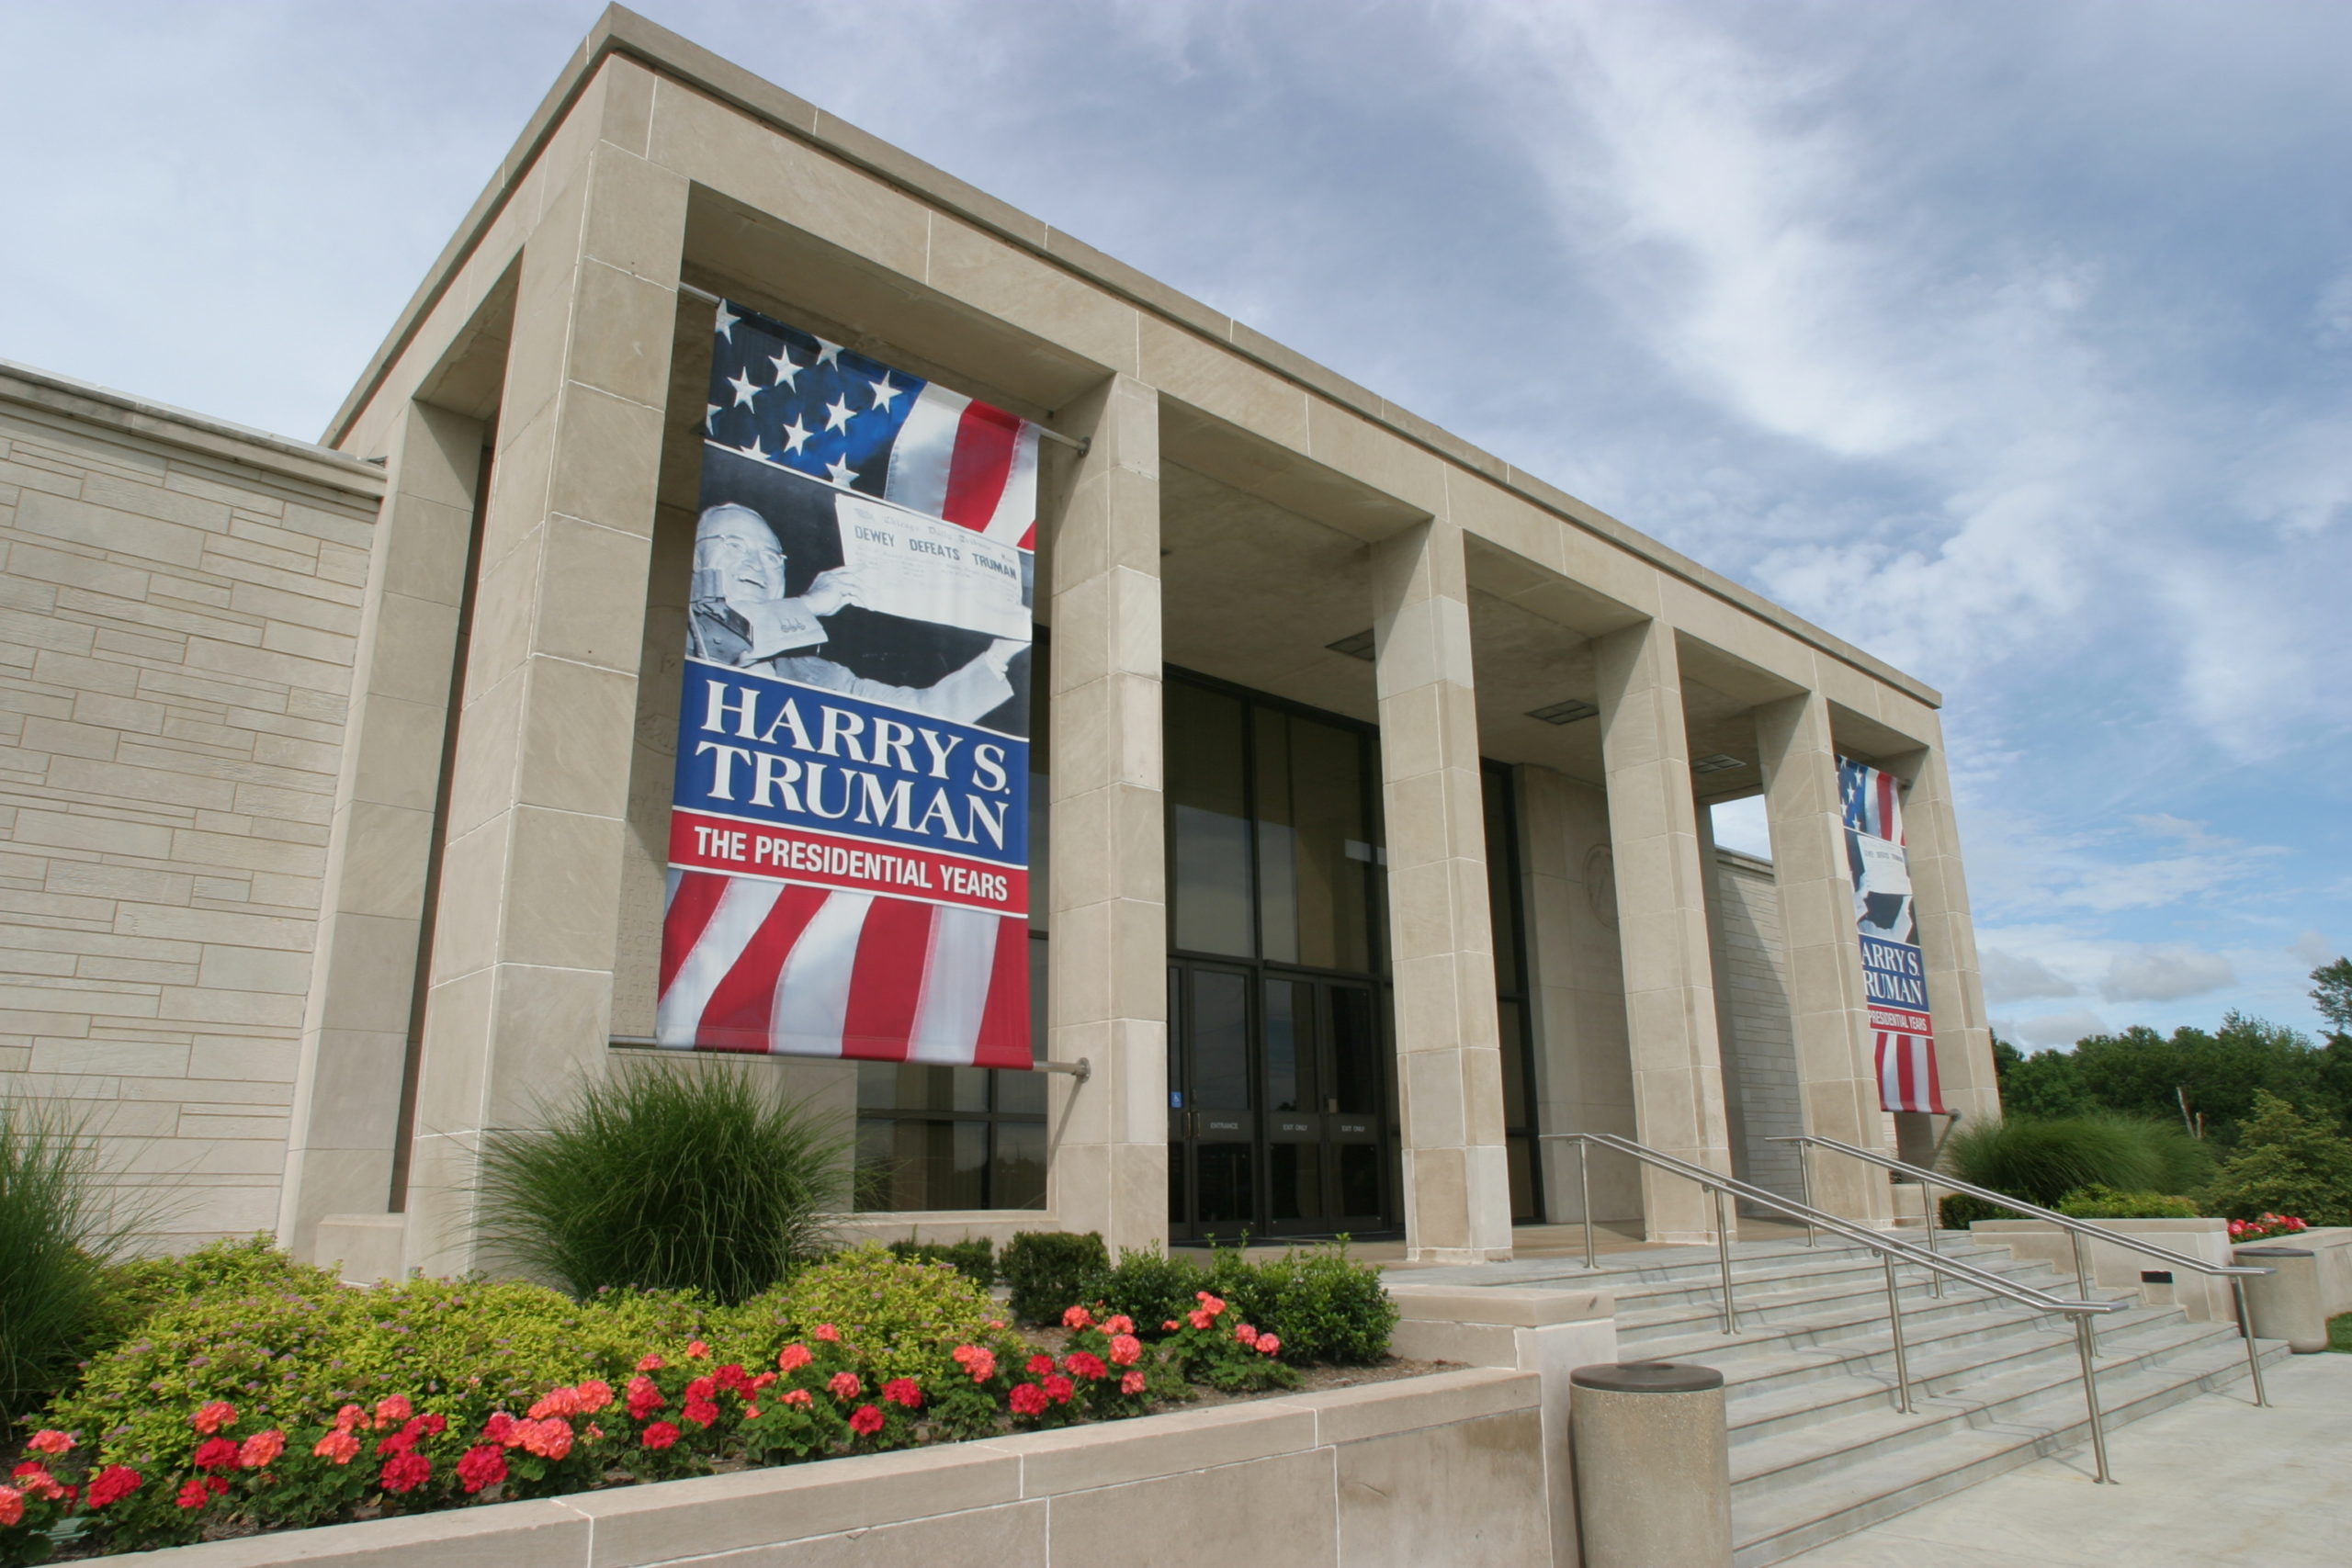 Harry Truman Presidential Library & Museum